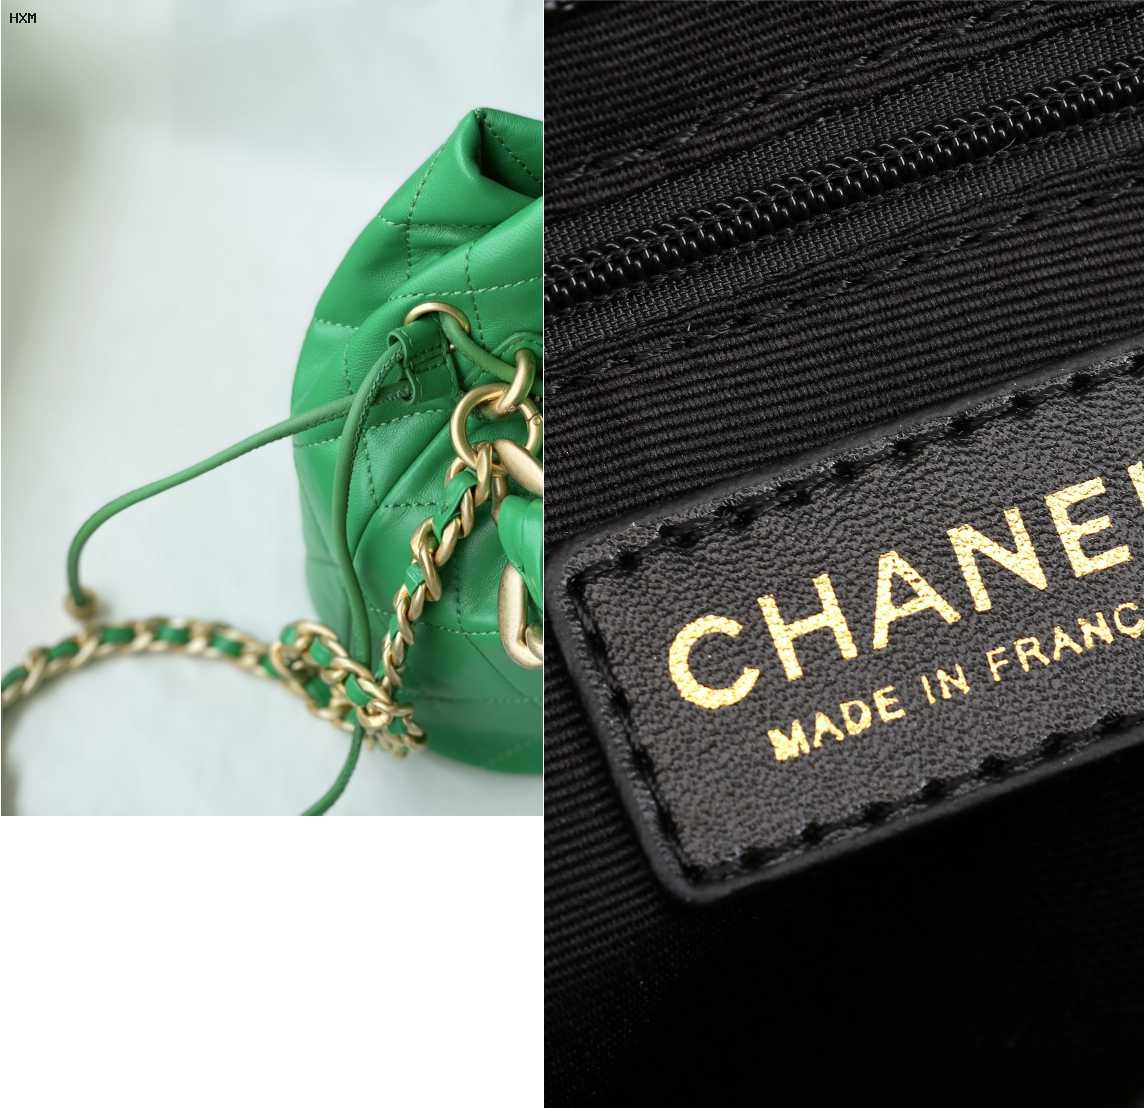 sac comme chanel